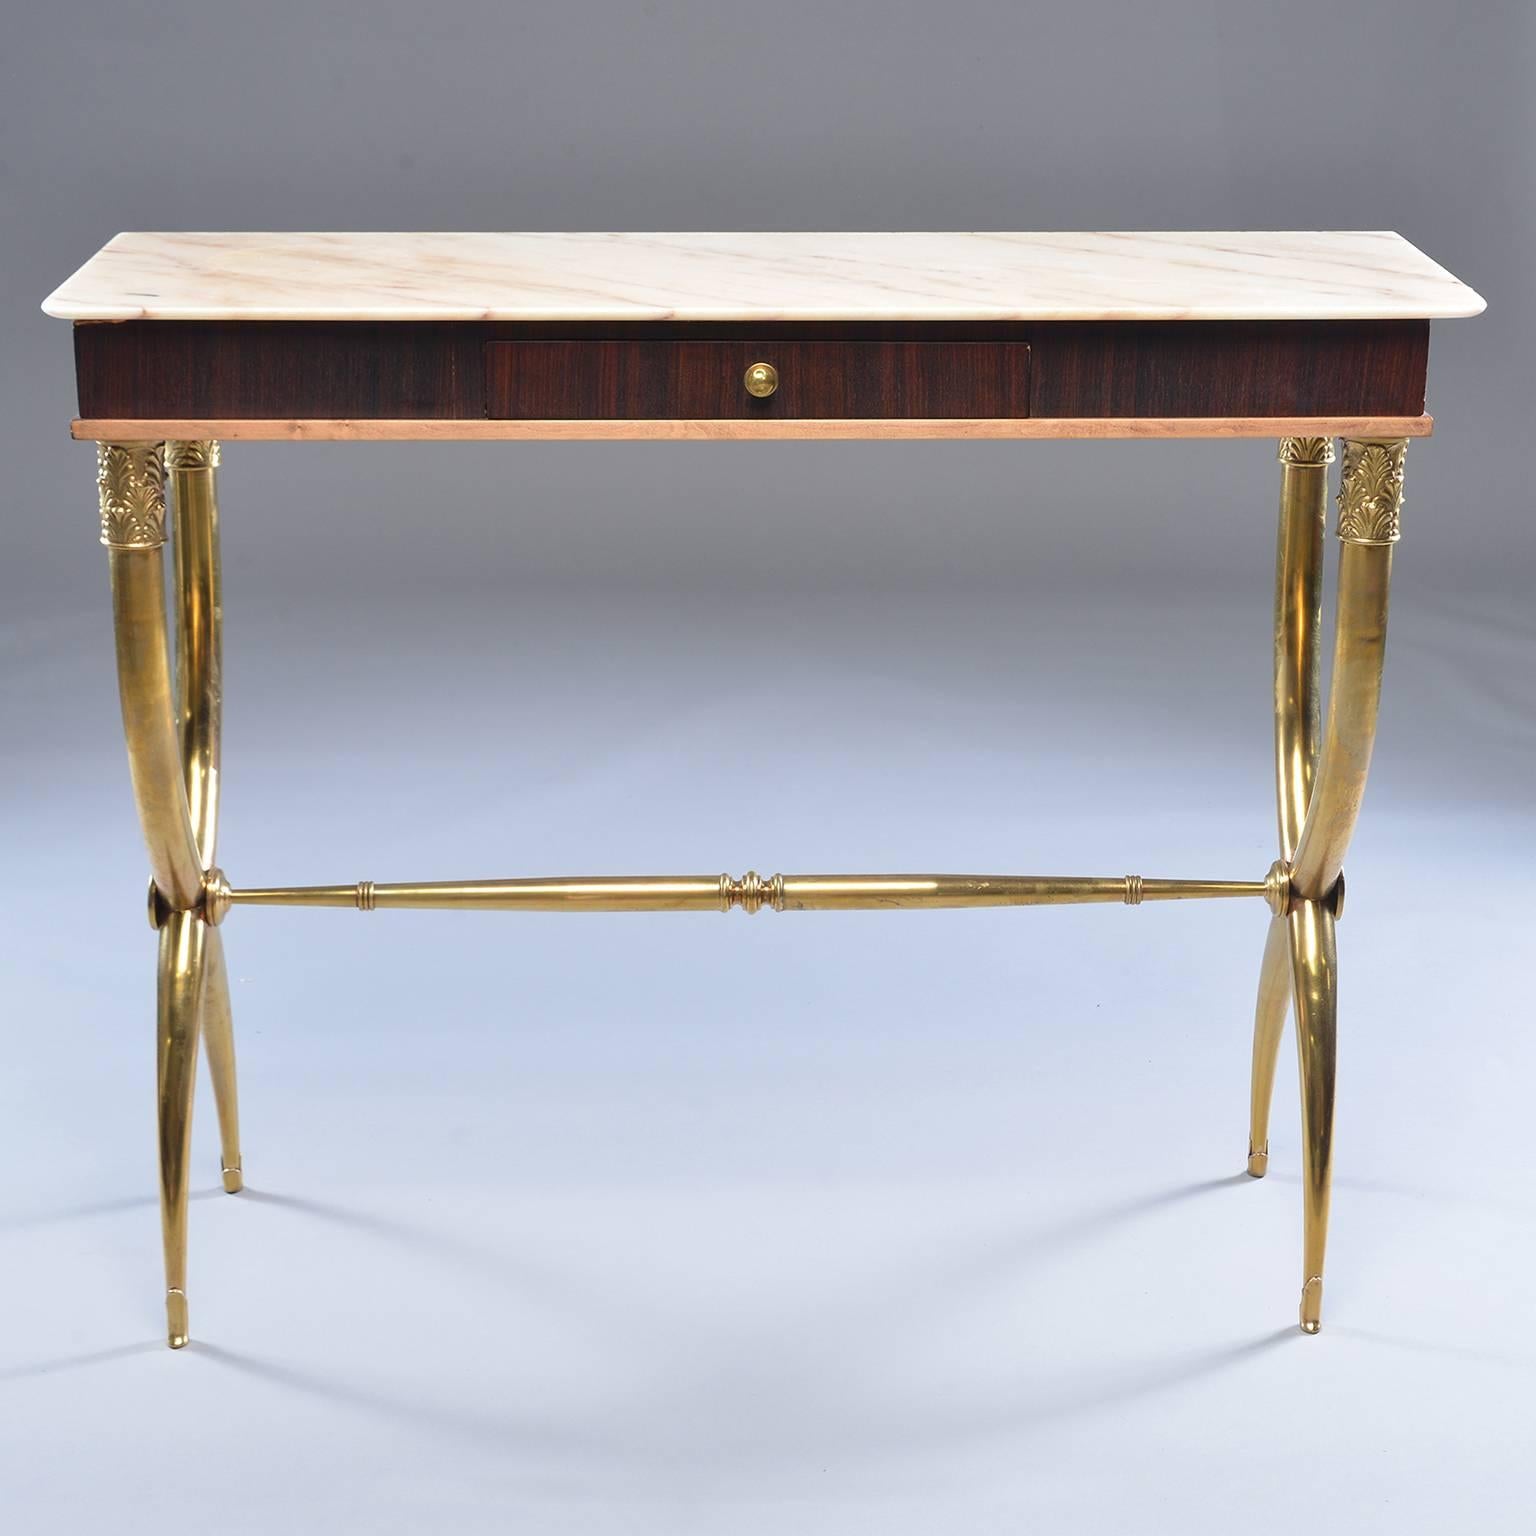 Italian neoclassical style console has brass base with X-form tapered legs embellished with acanthus leaf detail at top, tapered stretcher, wood table with single centre drawer and creamy marble top with pale apricot veins and streaks, circa 1960s.